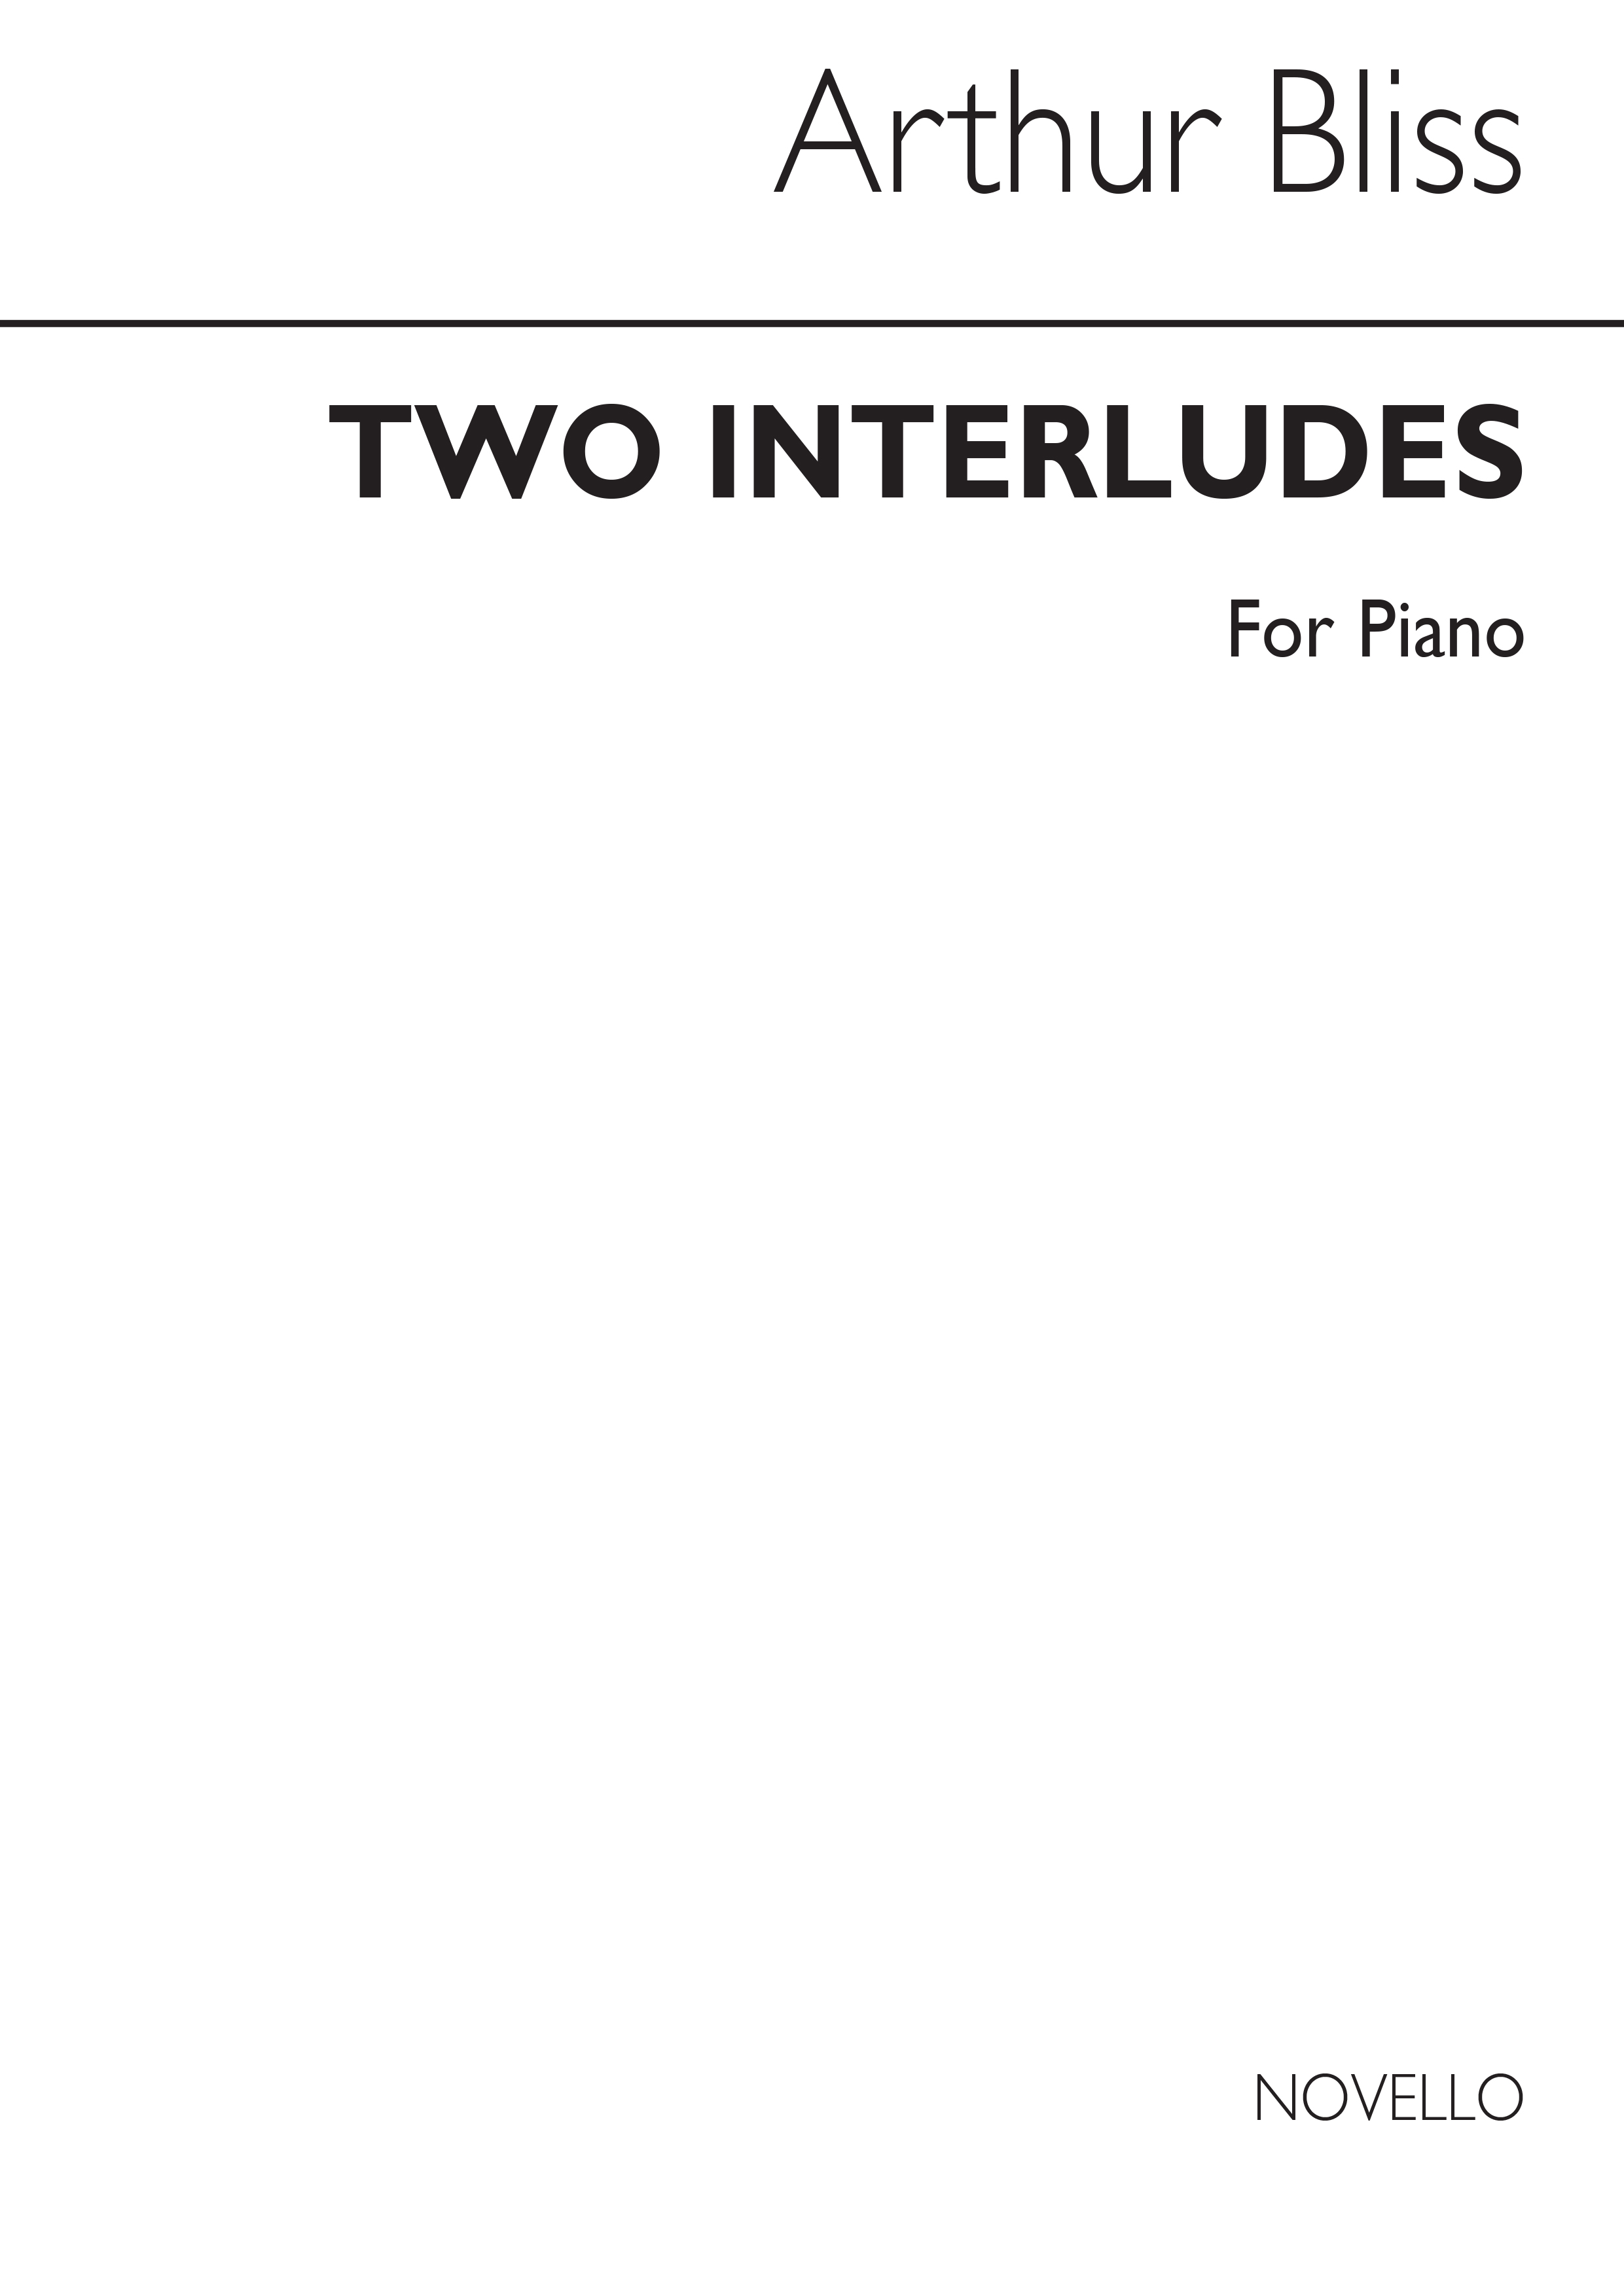 Arthur Bliss: Two Interludes for Piano